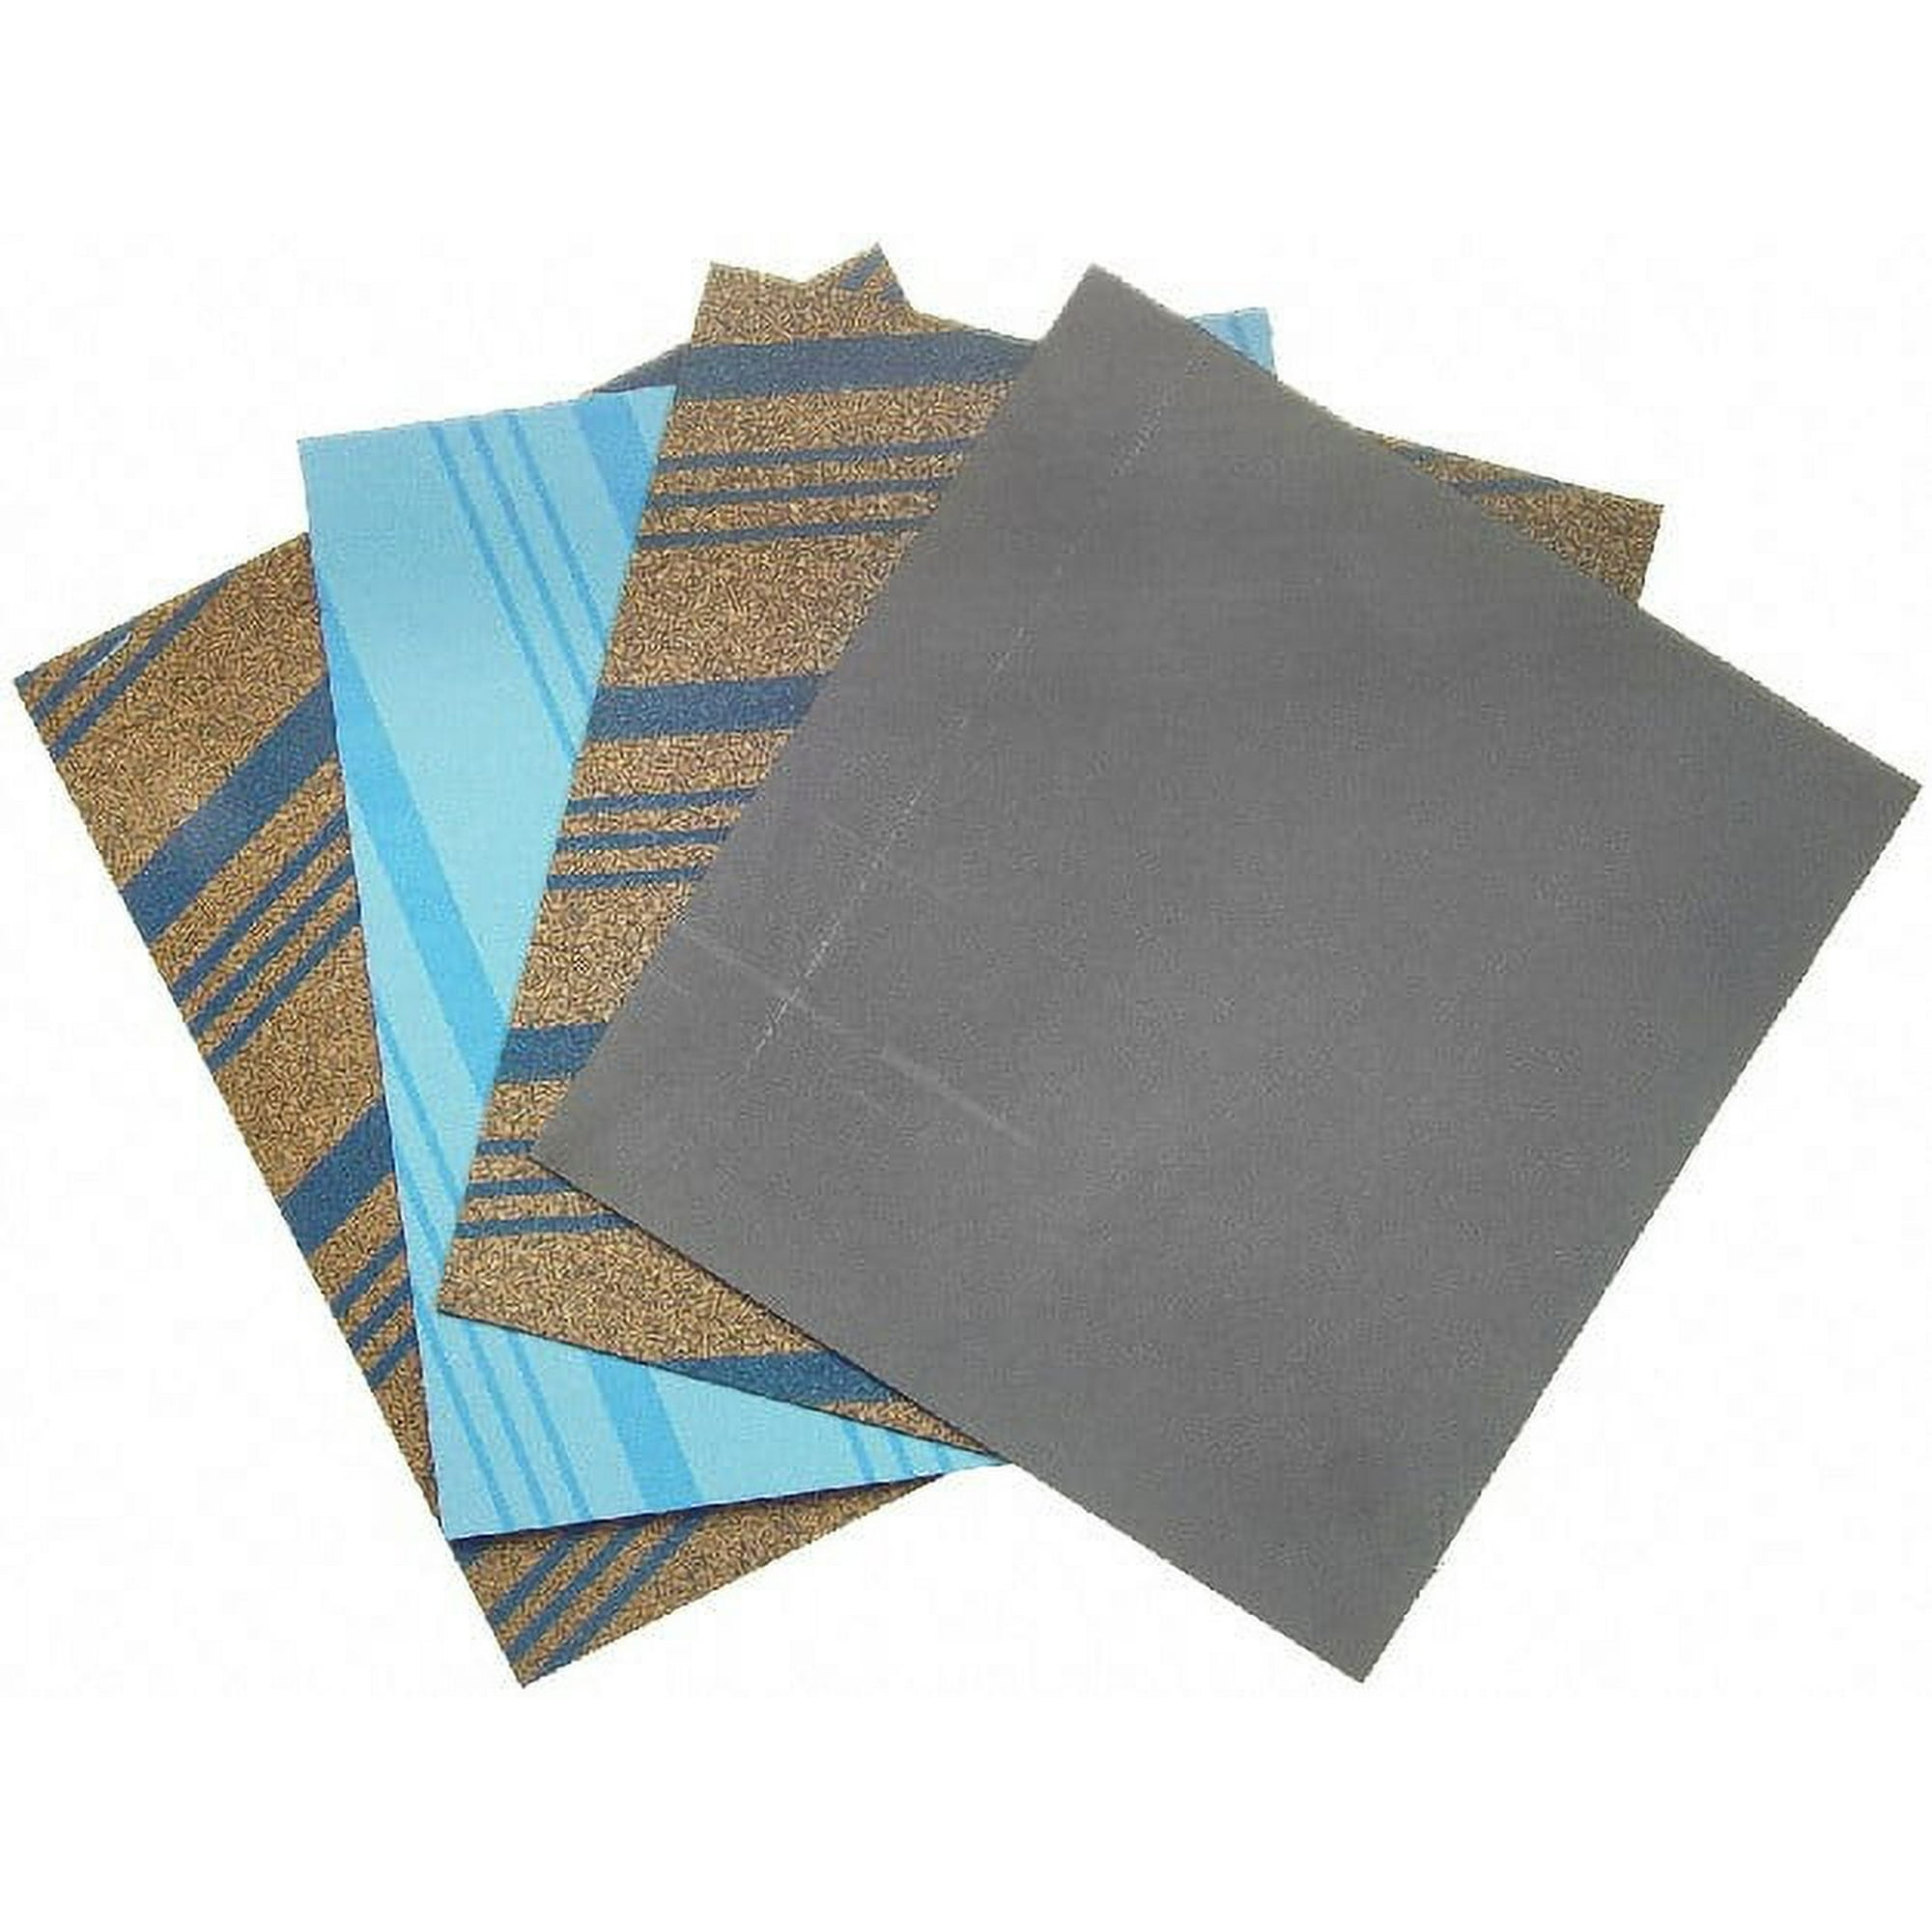 High Quality Rubber Gasket Material Sheet Various Sizes - Kit - Paidu Suppliers